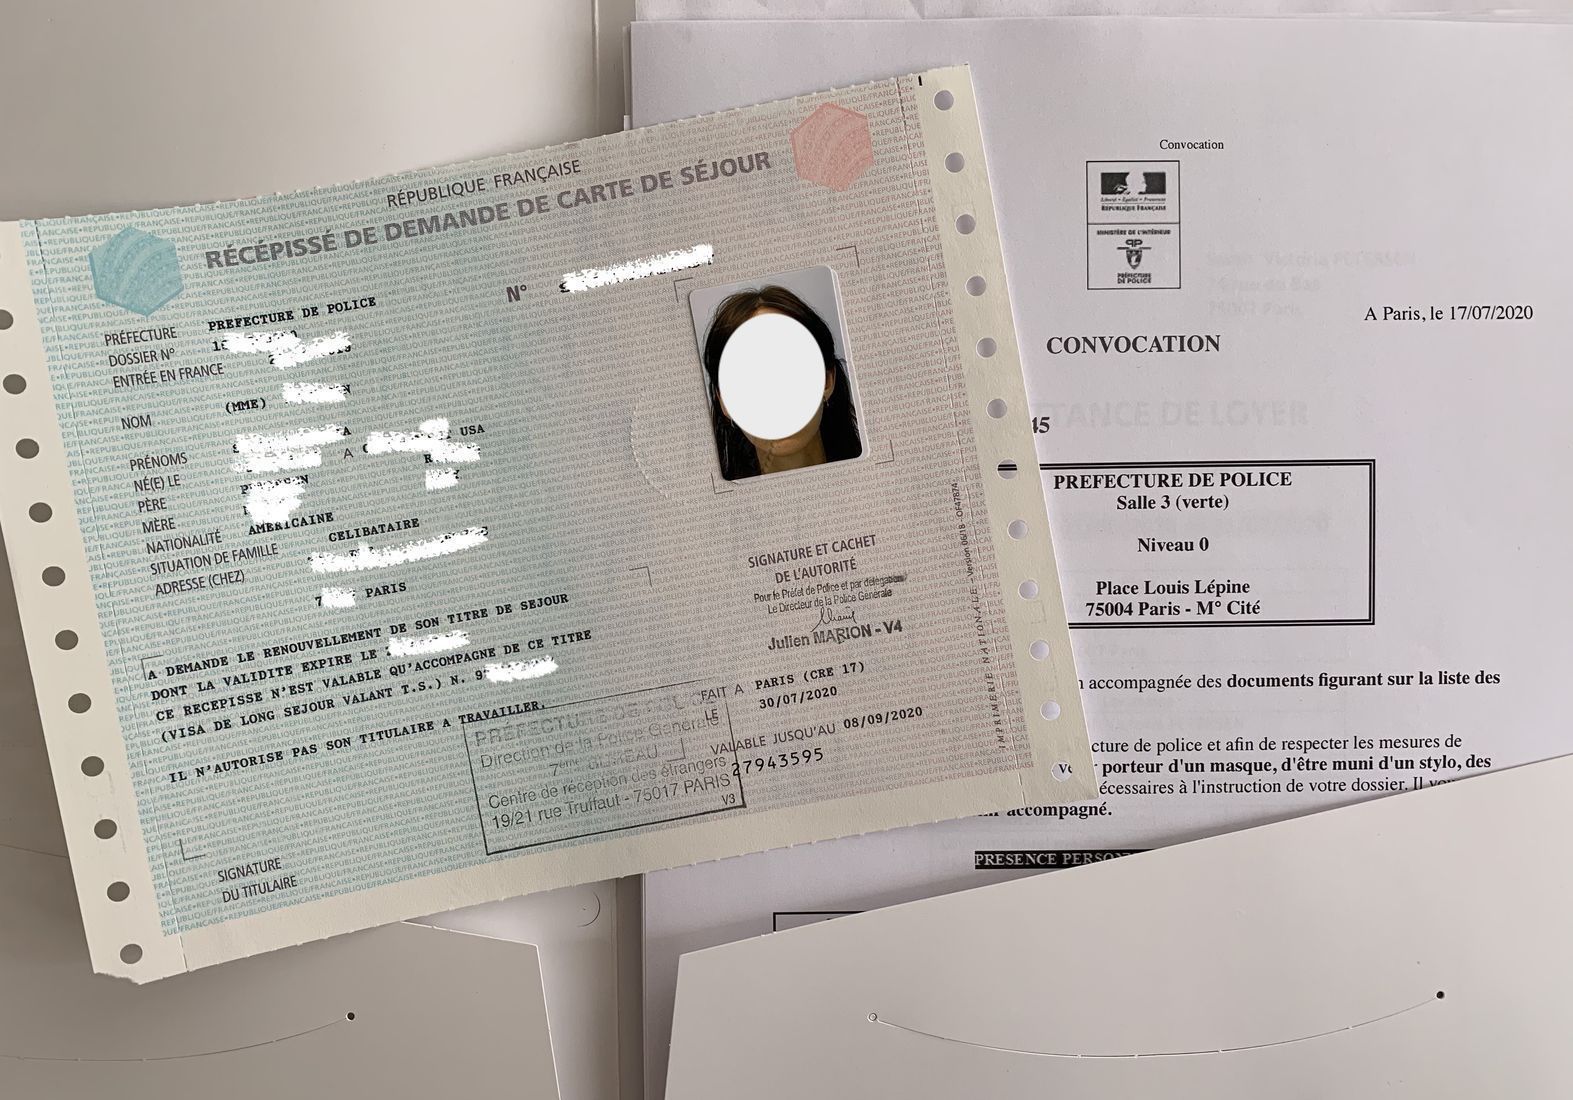 How to Get a Récépissé from the Paris Préfecture When Your French Visa Expires Before Your Renewal Appointment Date